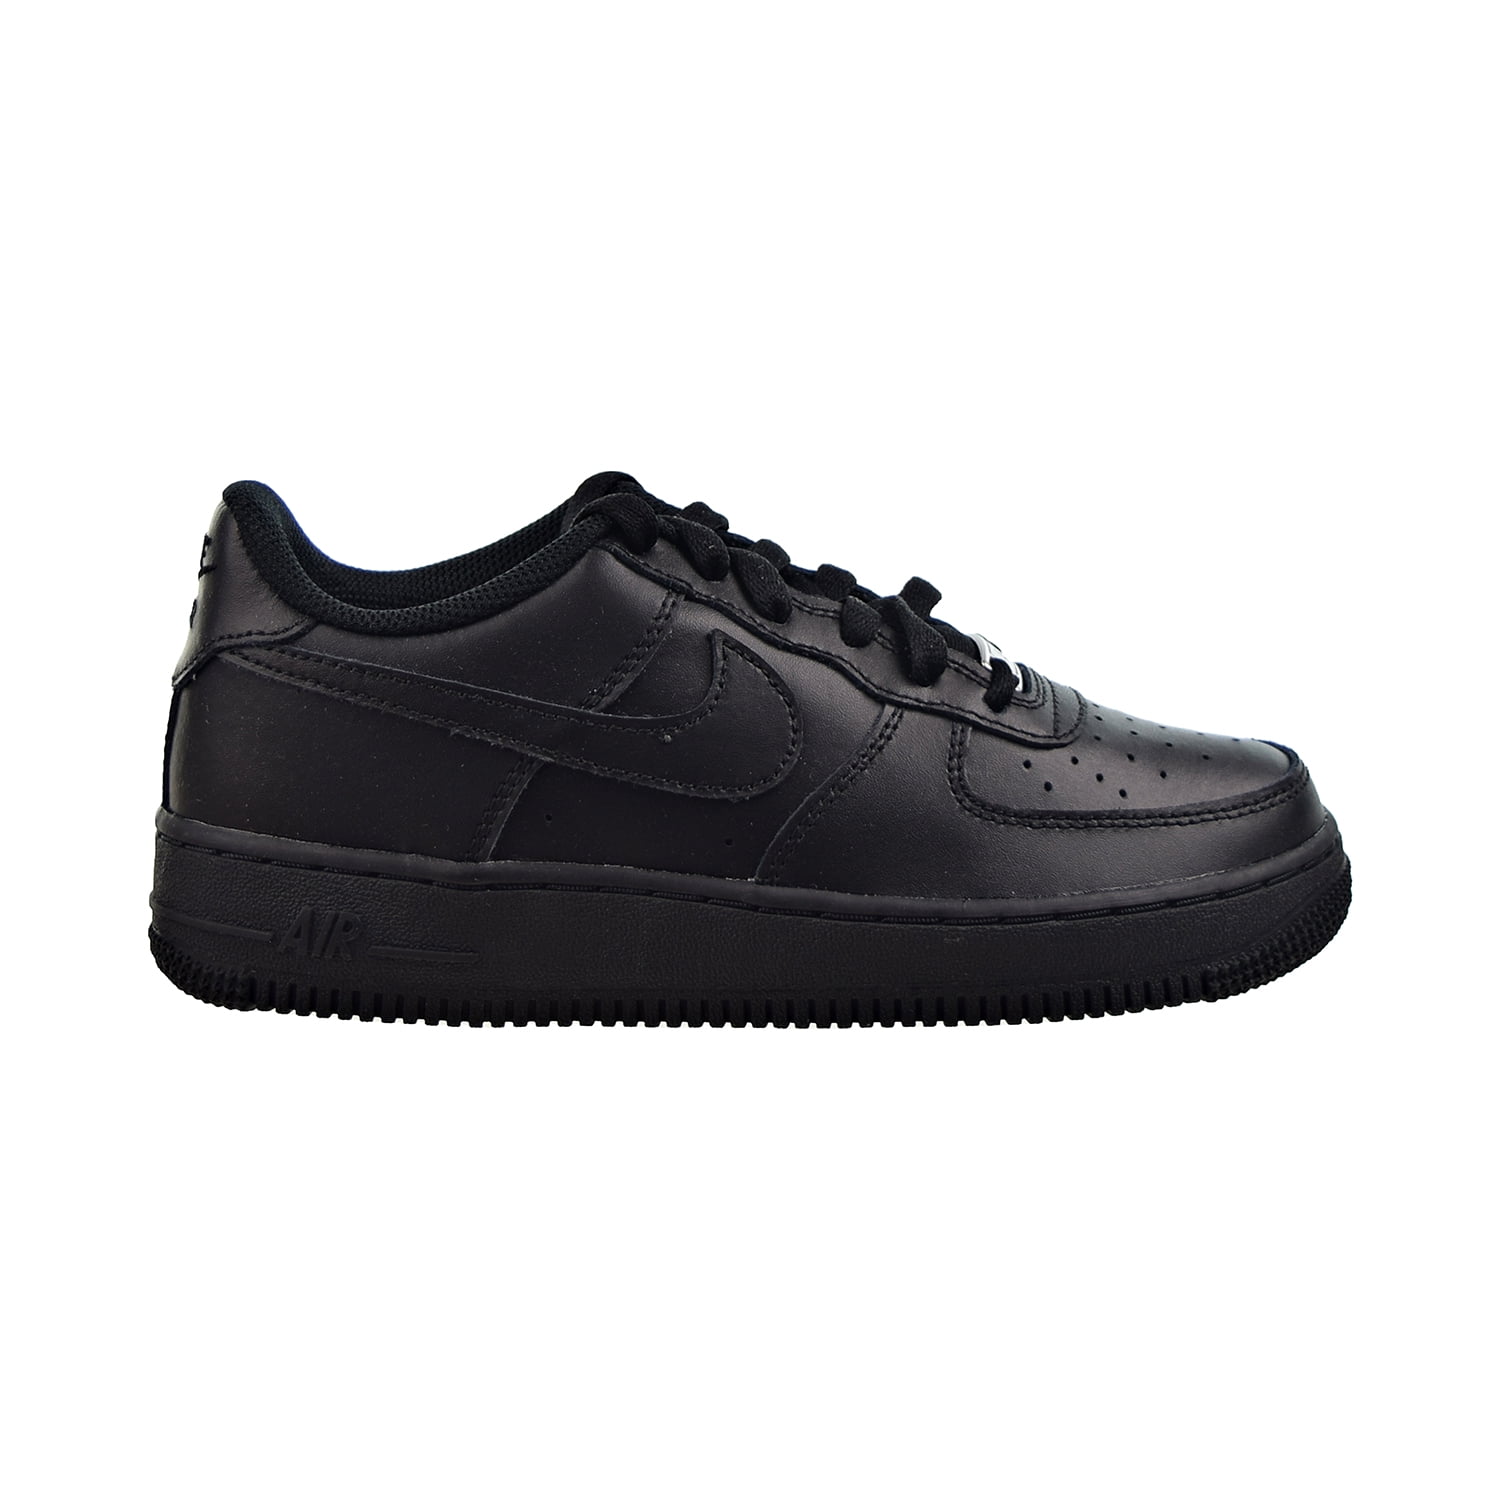 Nike Youth Kids Air Force 1 Sneakers Shoes Triple Black DH2925-001 Size 12C  12